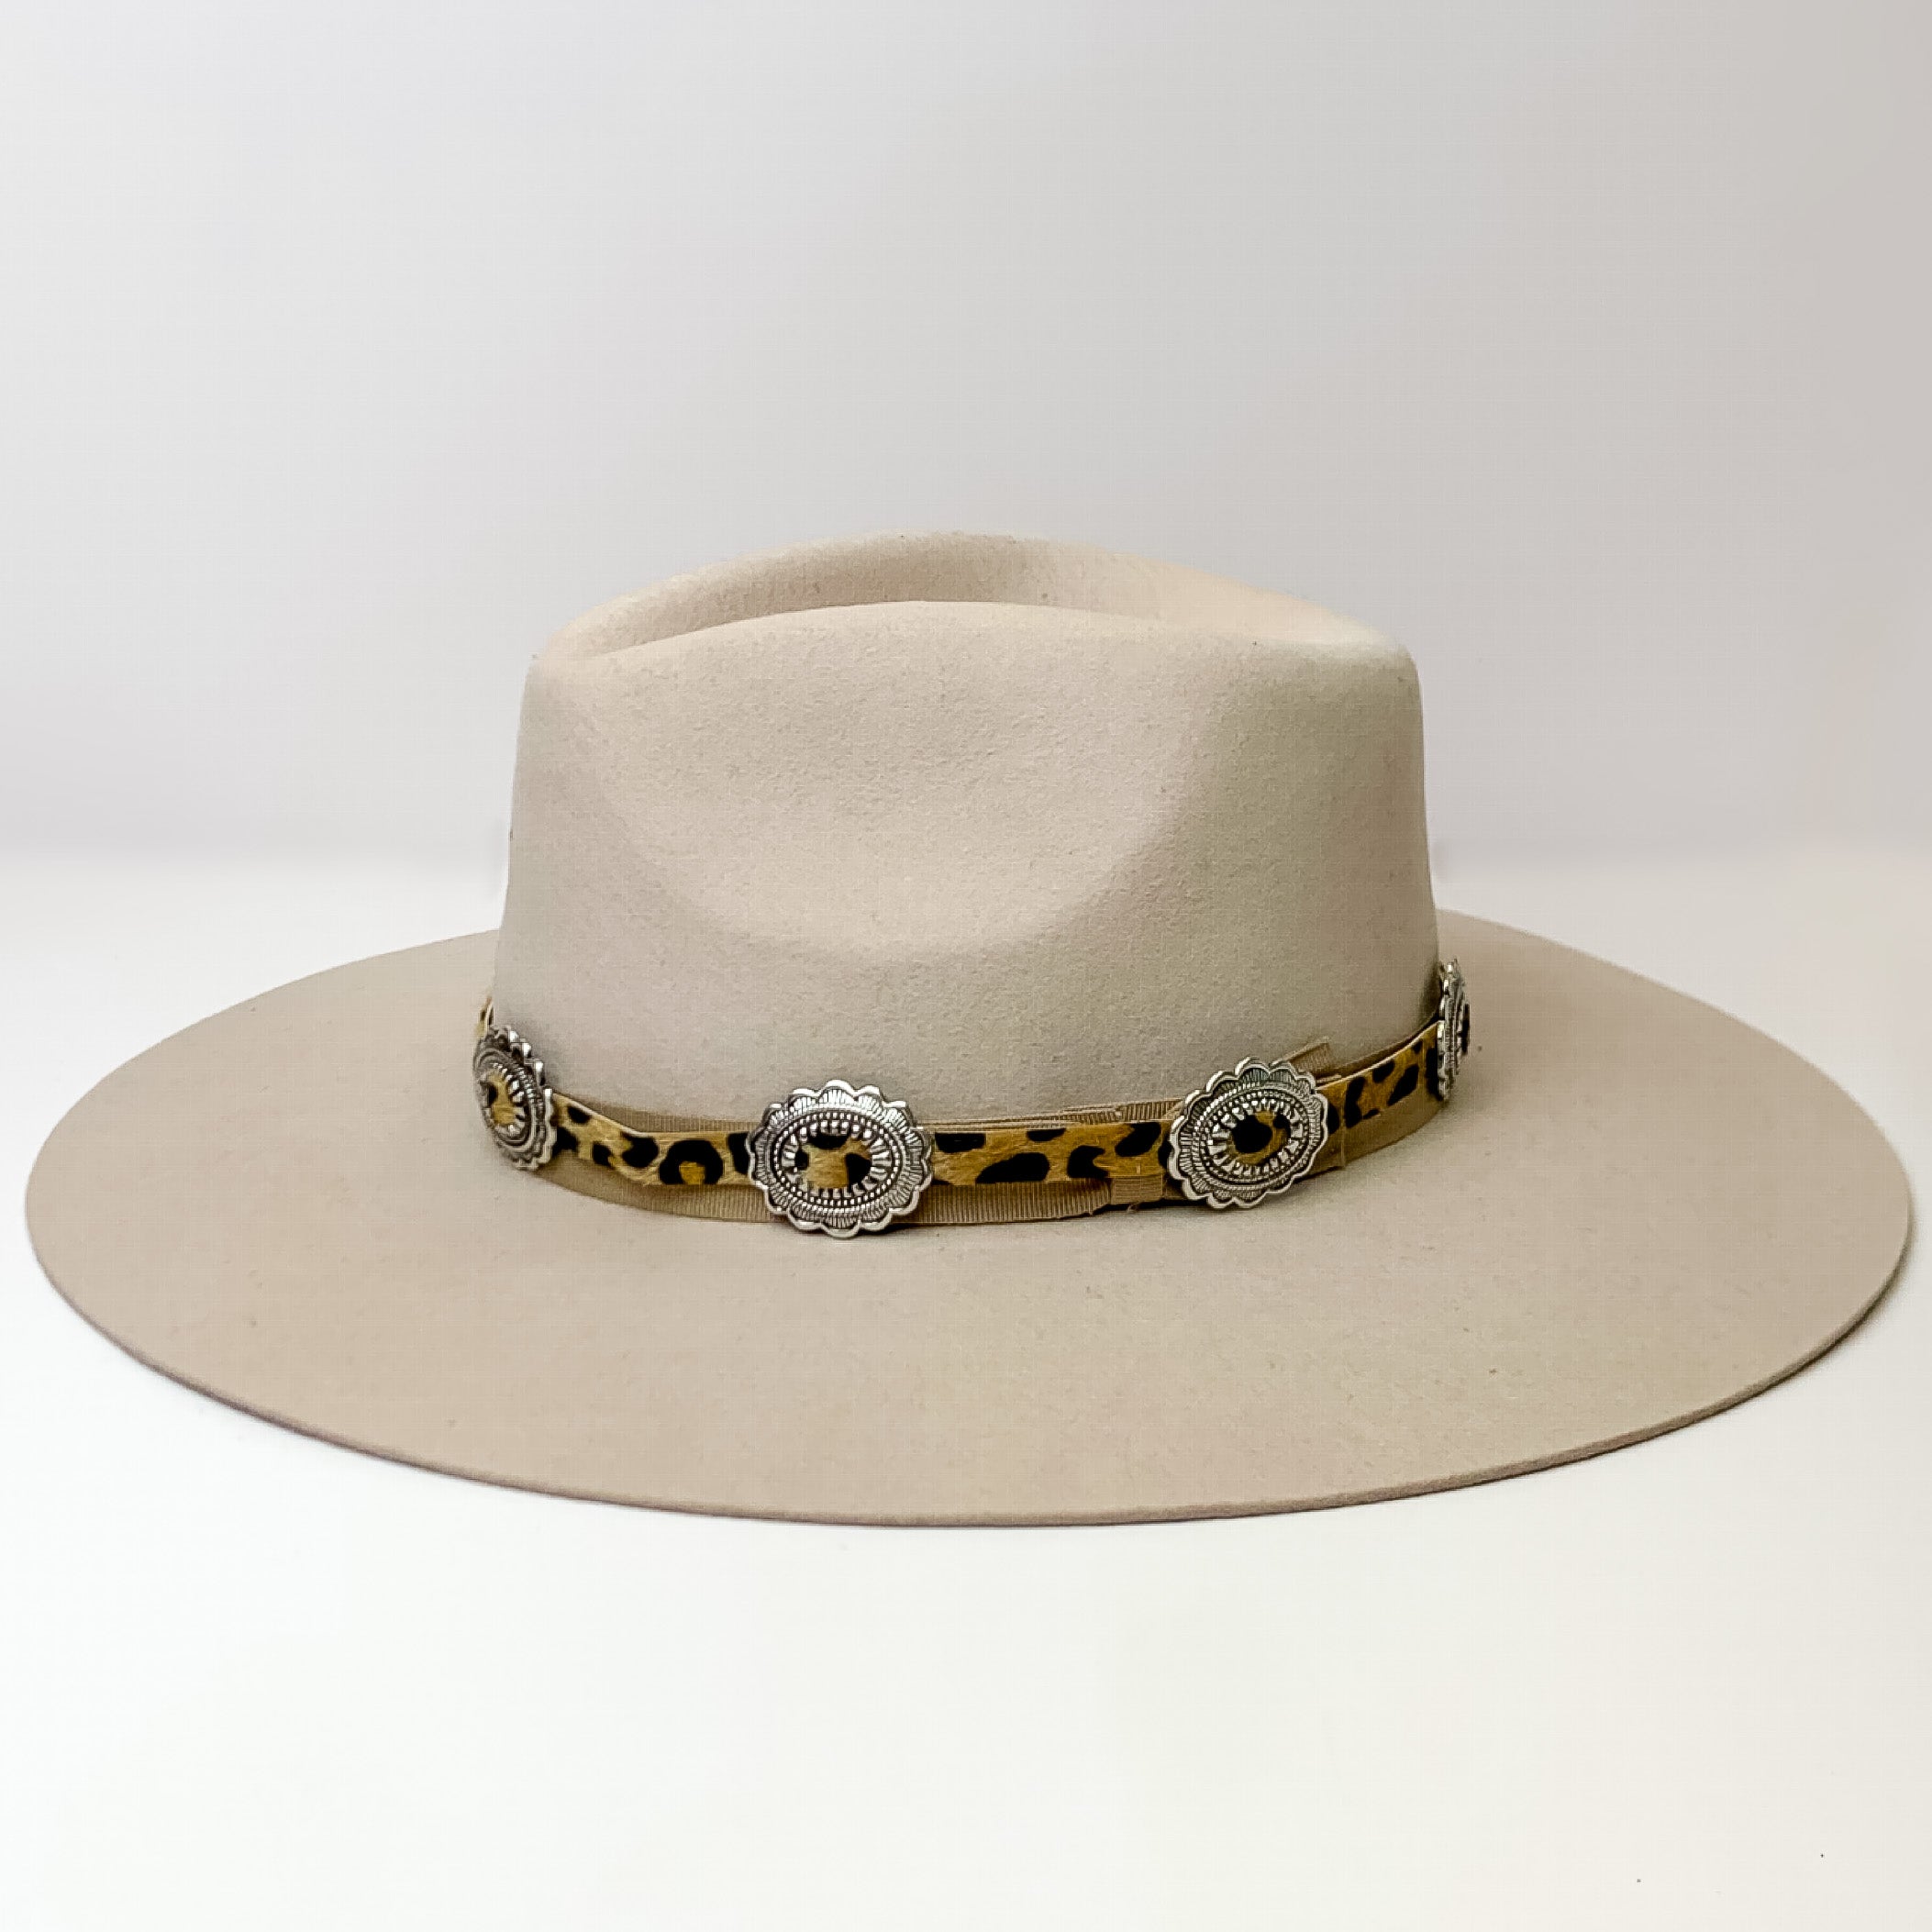 Leopard Print Hat Band With Conchos in Silver Tone - Giddy Up Glamour Boutique